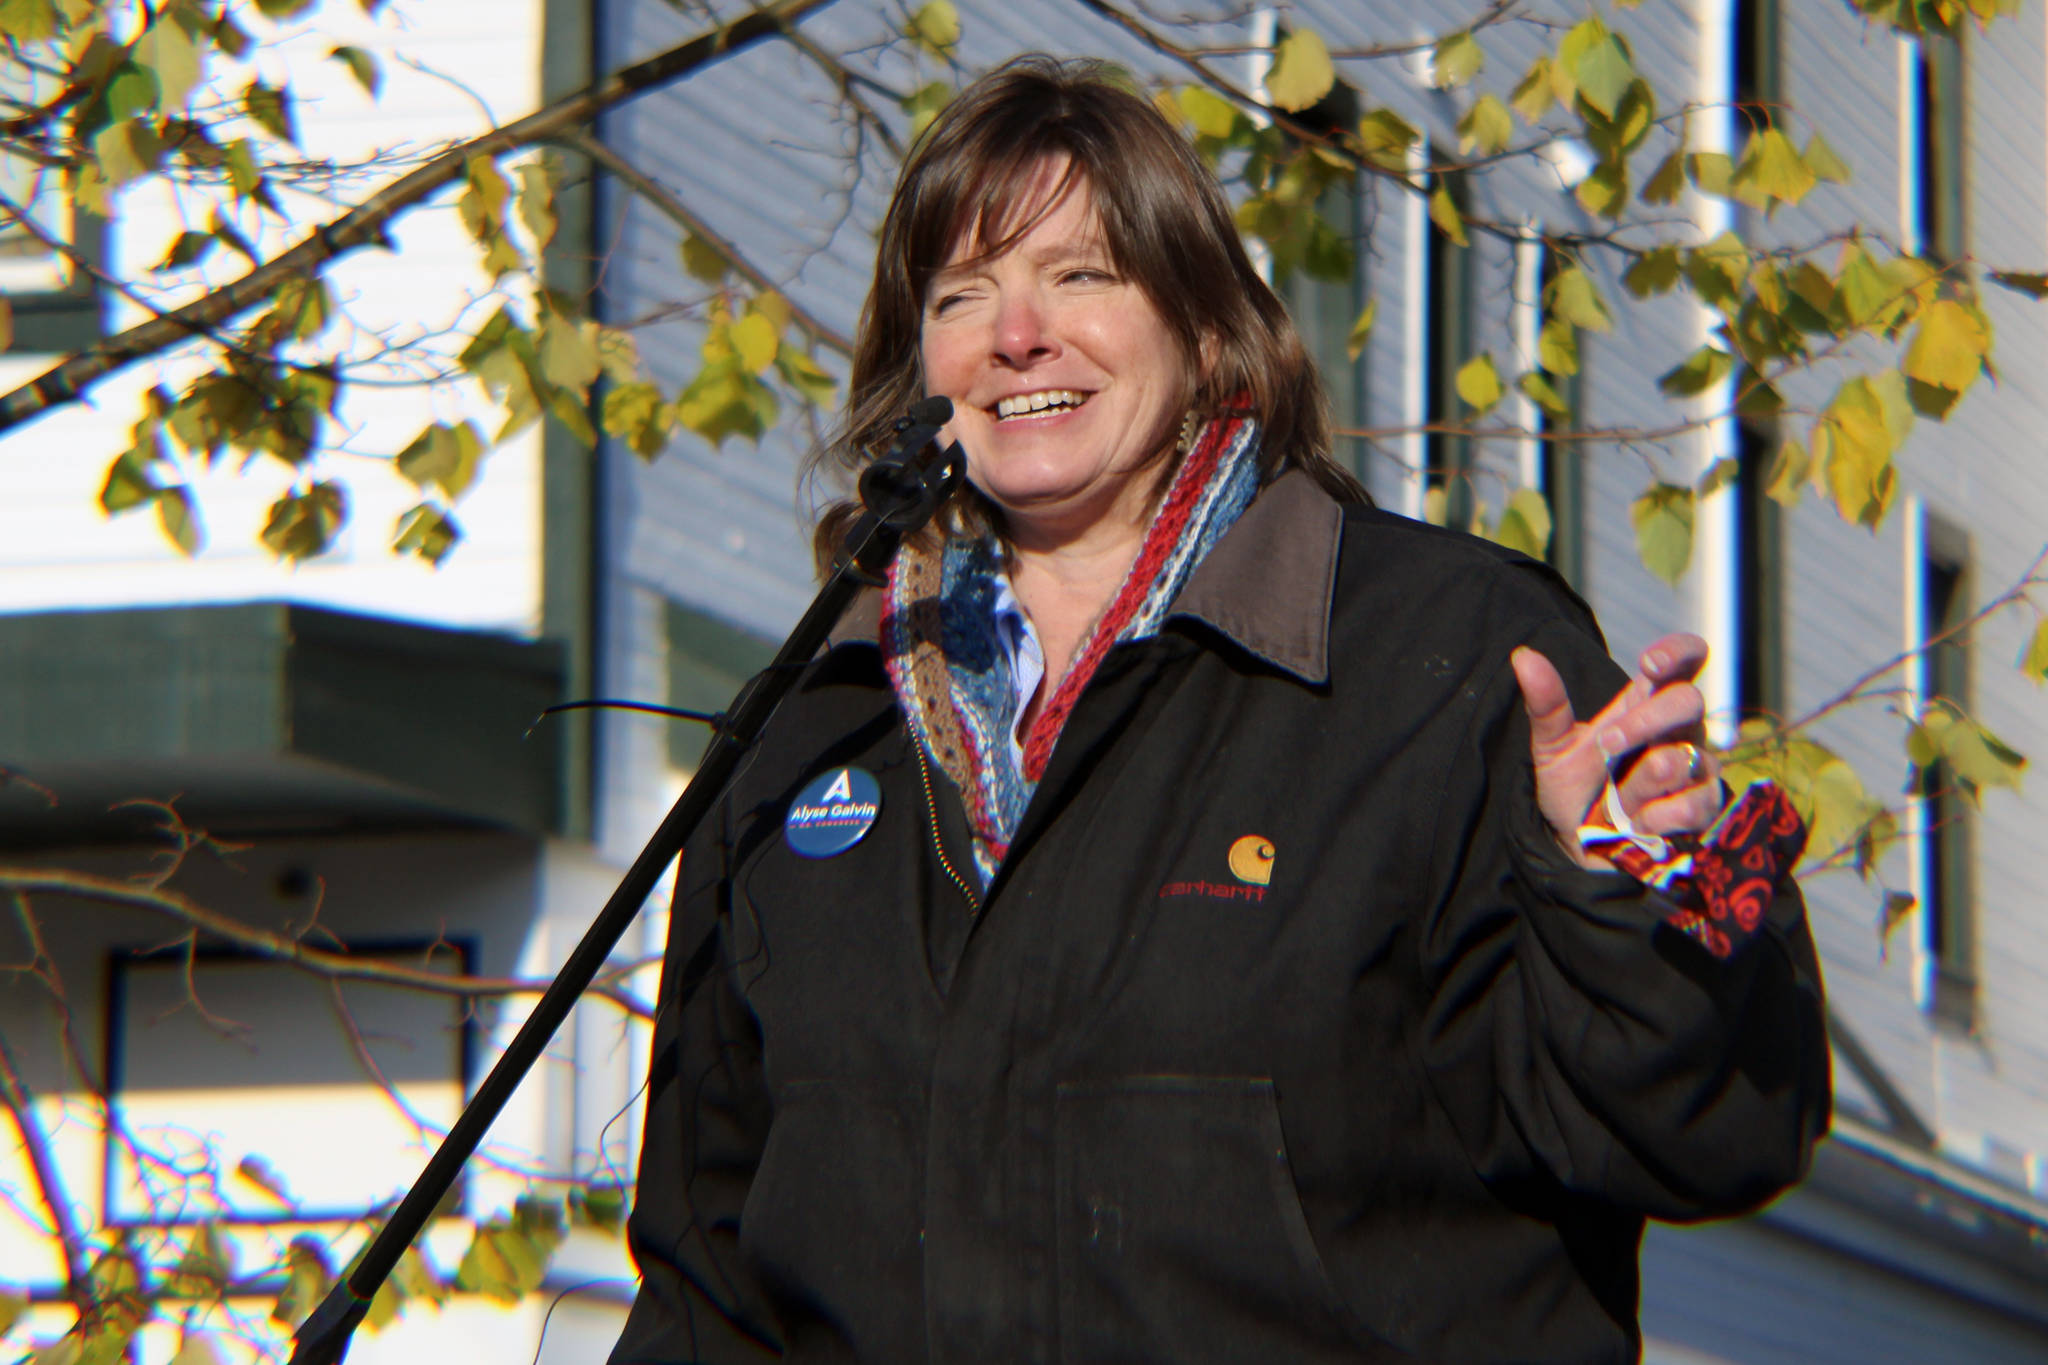 Alyse Galvin, independent candidate for Alaska's only House of Representatives seat, speaks at a drive-in rally on South Franklin Street in downtown Juneau on Saturday, Oct. 17, 2020. Glavin is running for the second time trying to oust Rep. Don Young, R-Alaska, who's held the seat since 1973. (Ben Hohenstatt / Juneau Empire.